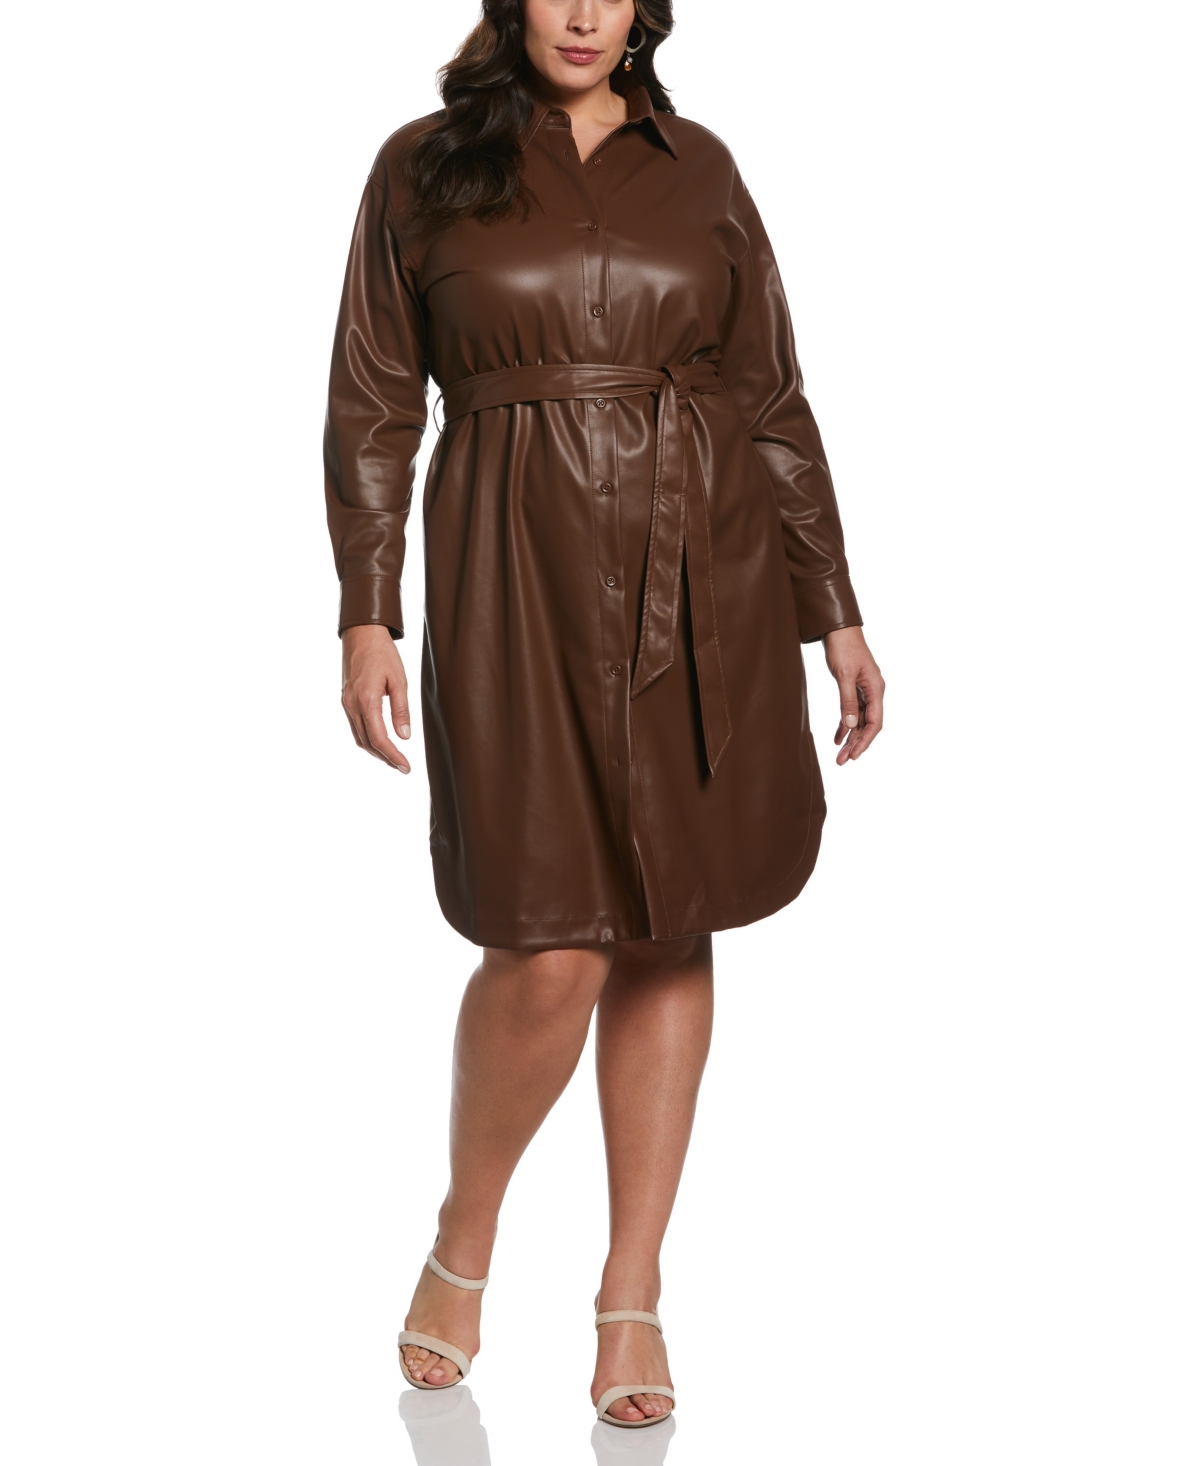 Plus Size Faux Leather Long Sleeve Shirtdress - Rocky Road